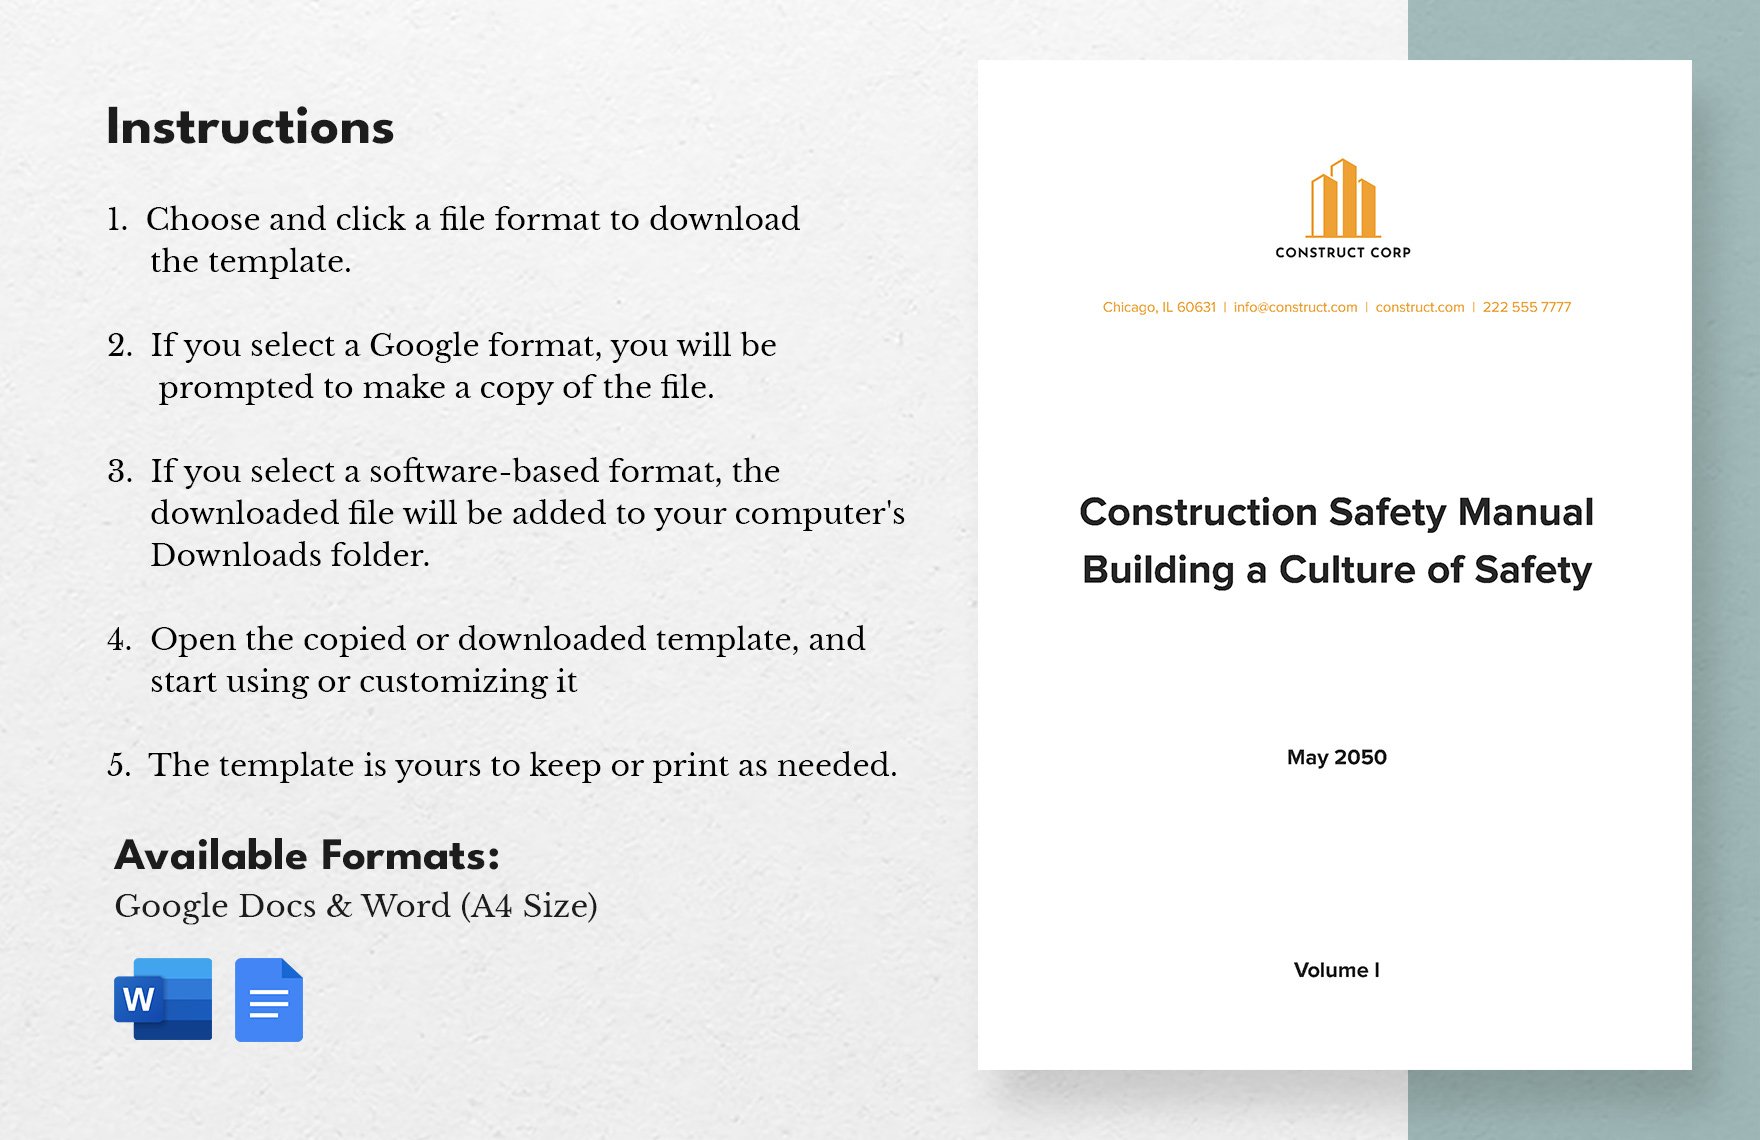 Construction Safety Manual Template